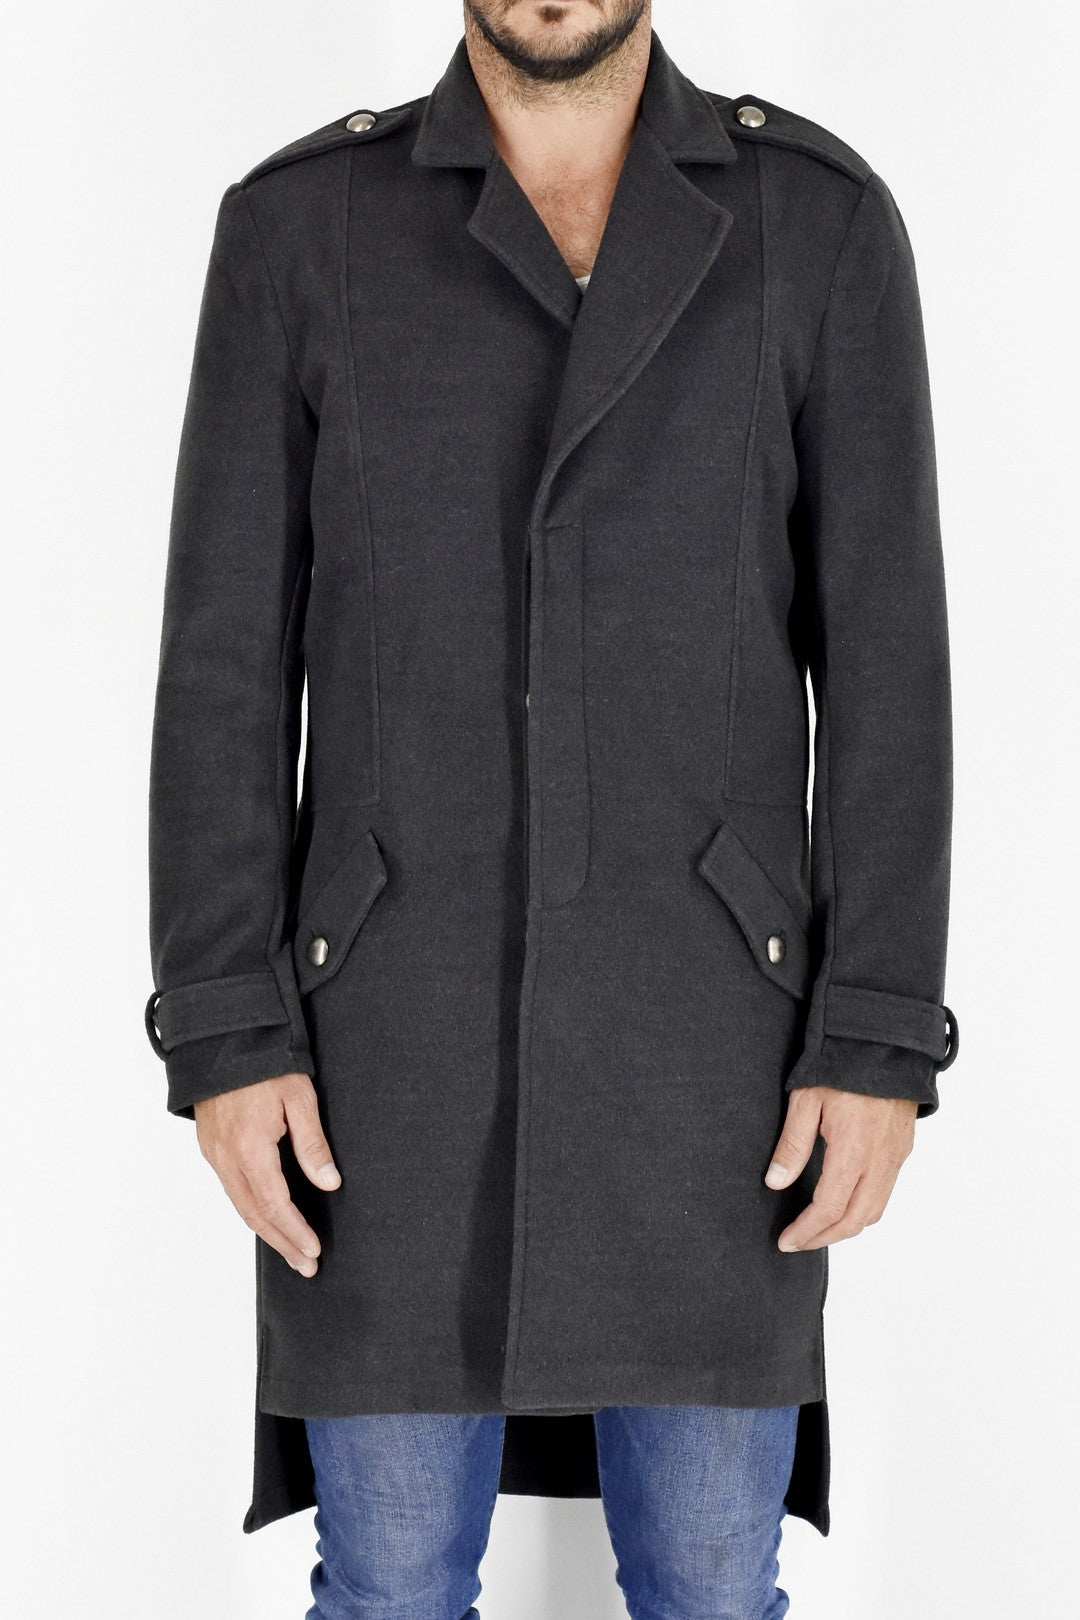 PHIGVEL 19AW MELTON DOUBLE BREASTED COAT | myglobaltax.com